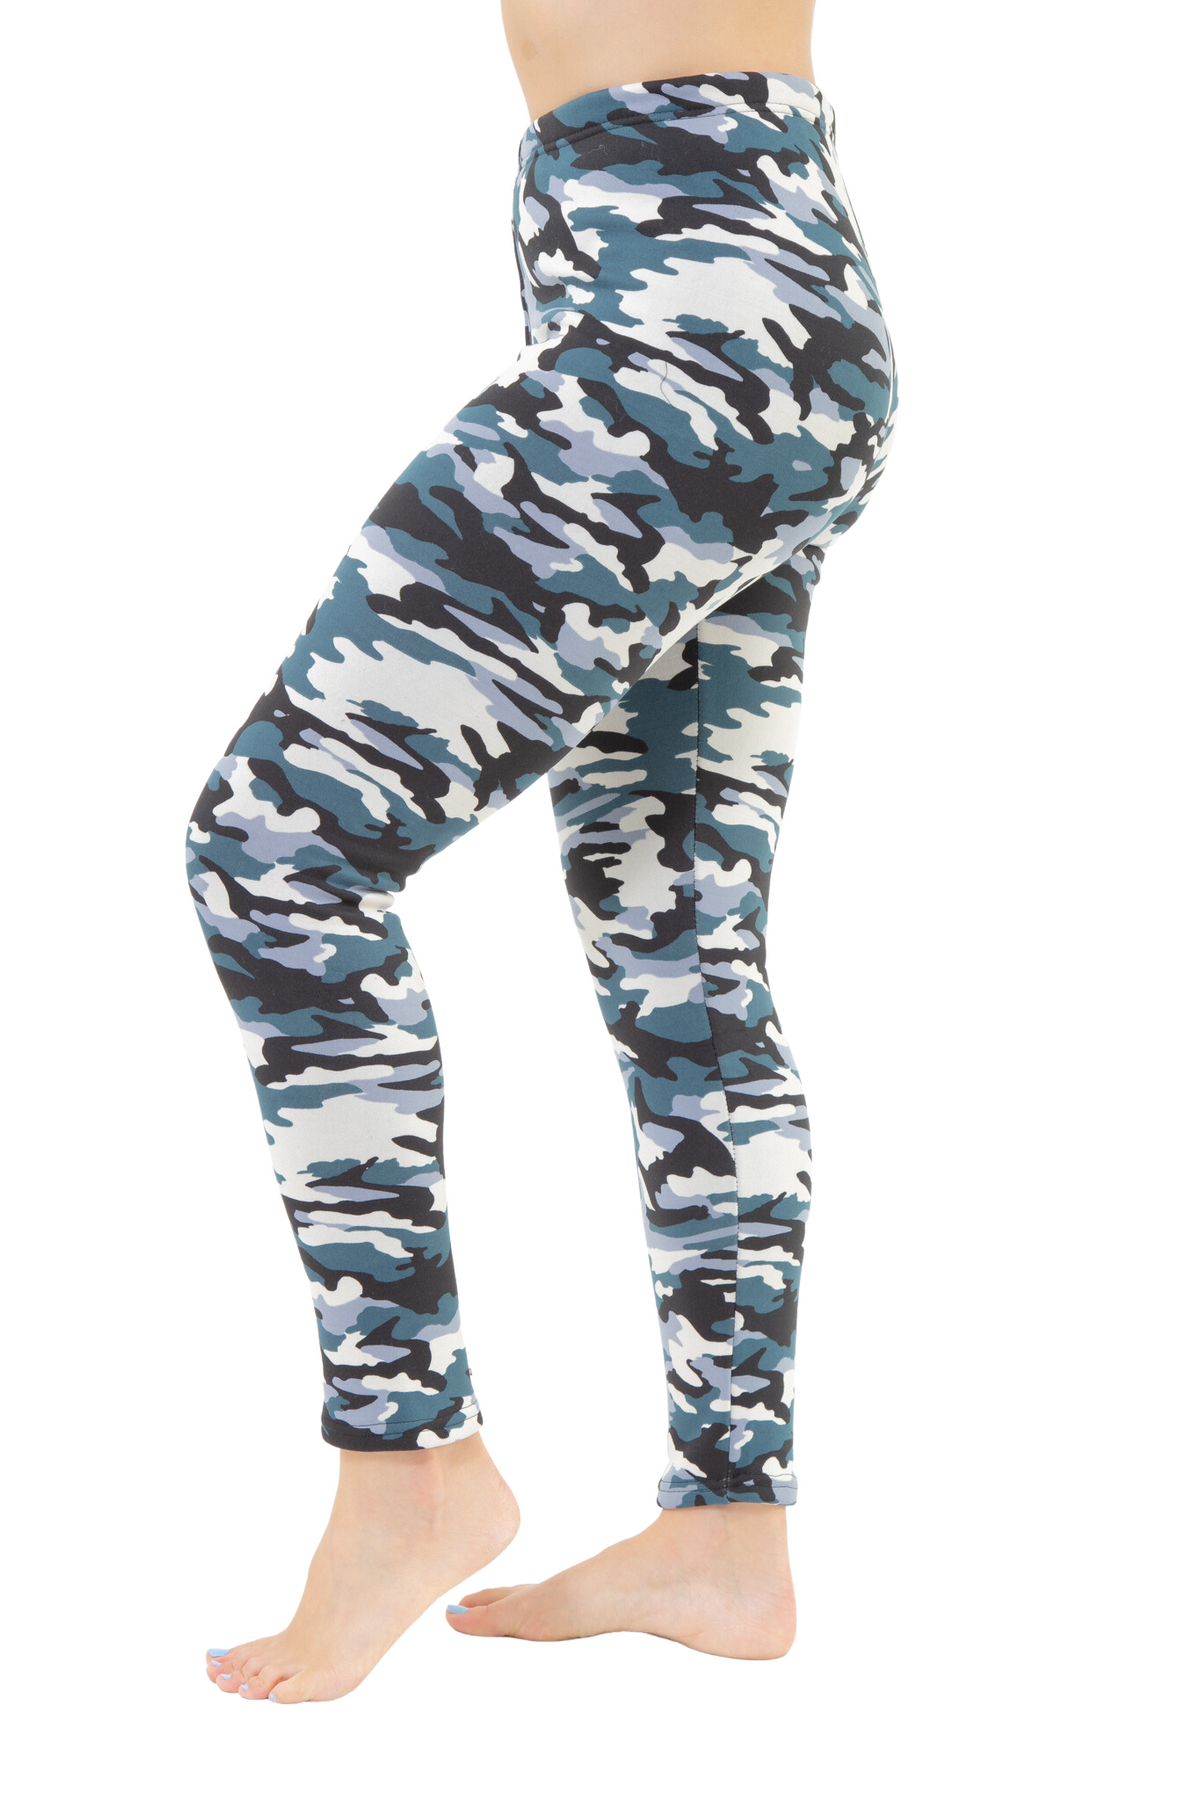 Wild Fable womens legging Camo gray color size medium high-waisted Stretchy  nwt